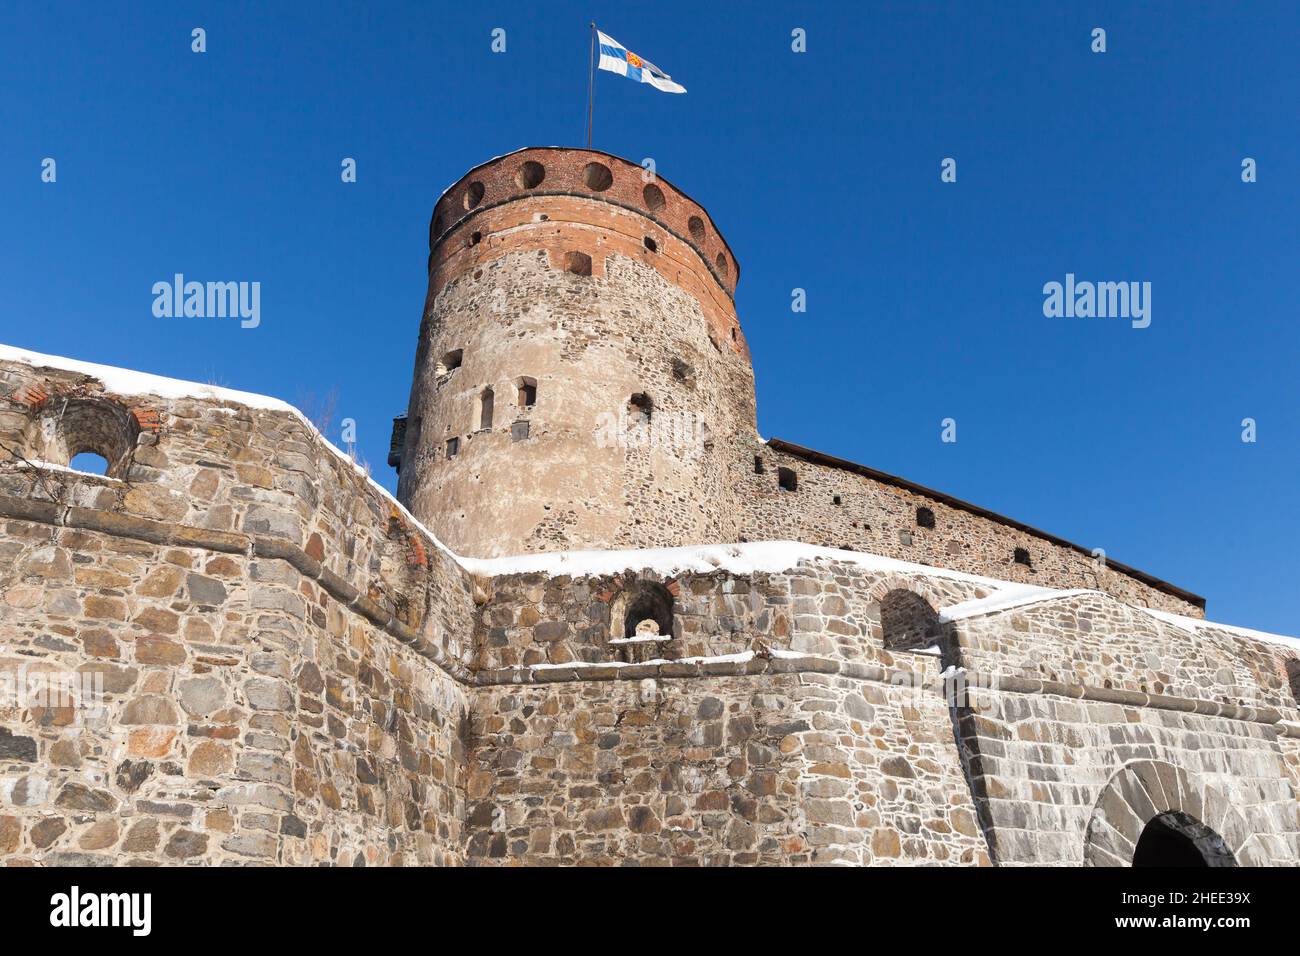 Olavinlinna is under blue sky on a sunny day. It is a 15th-century three-tower castle located in Savonlinna, Finland. The fortress was founded by Erik Stock Photo